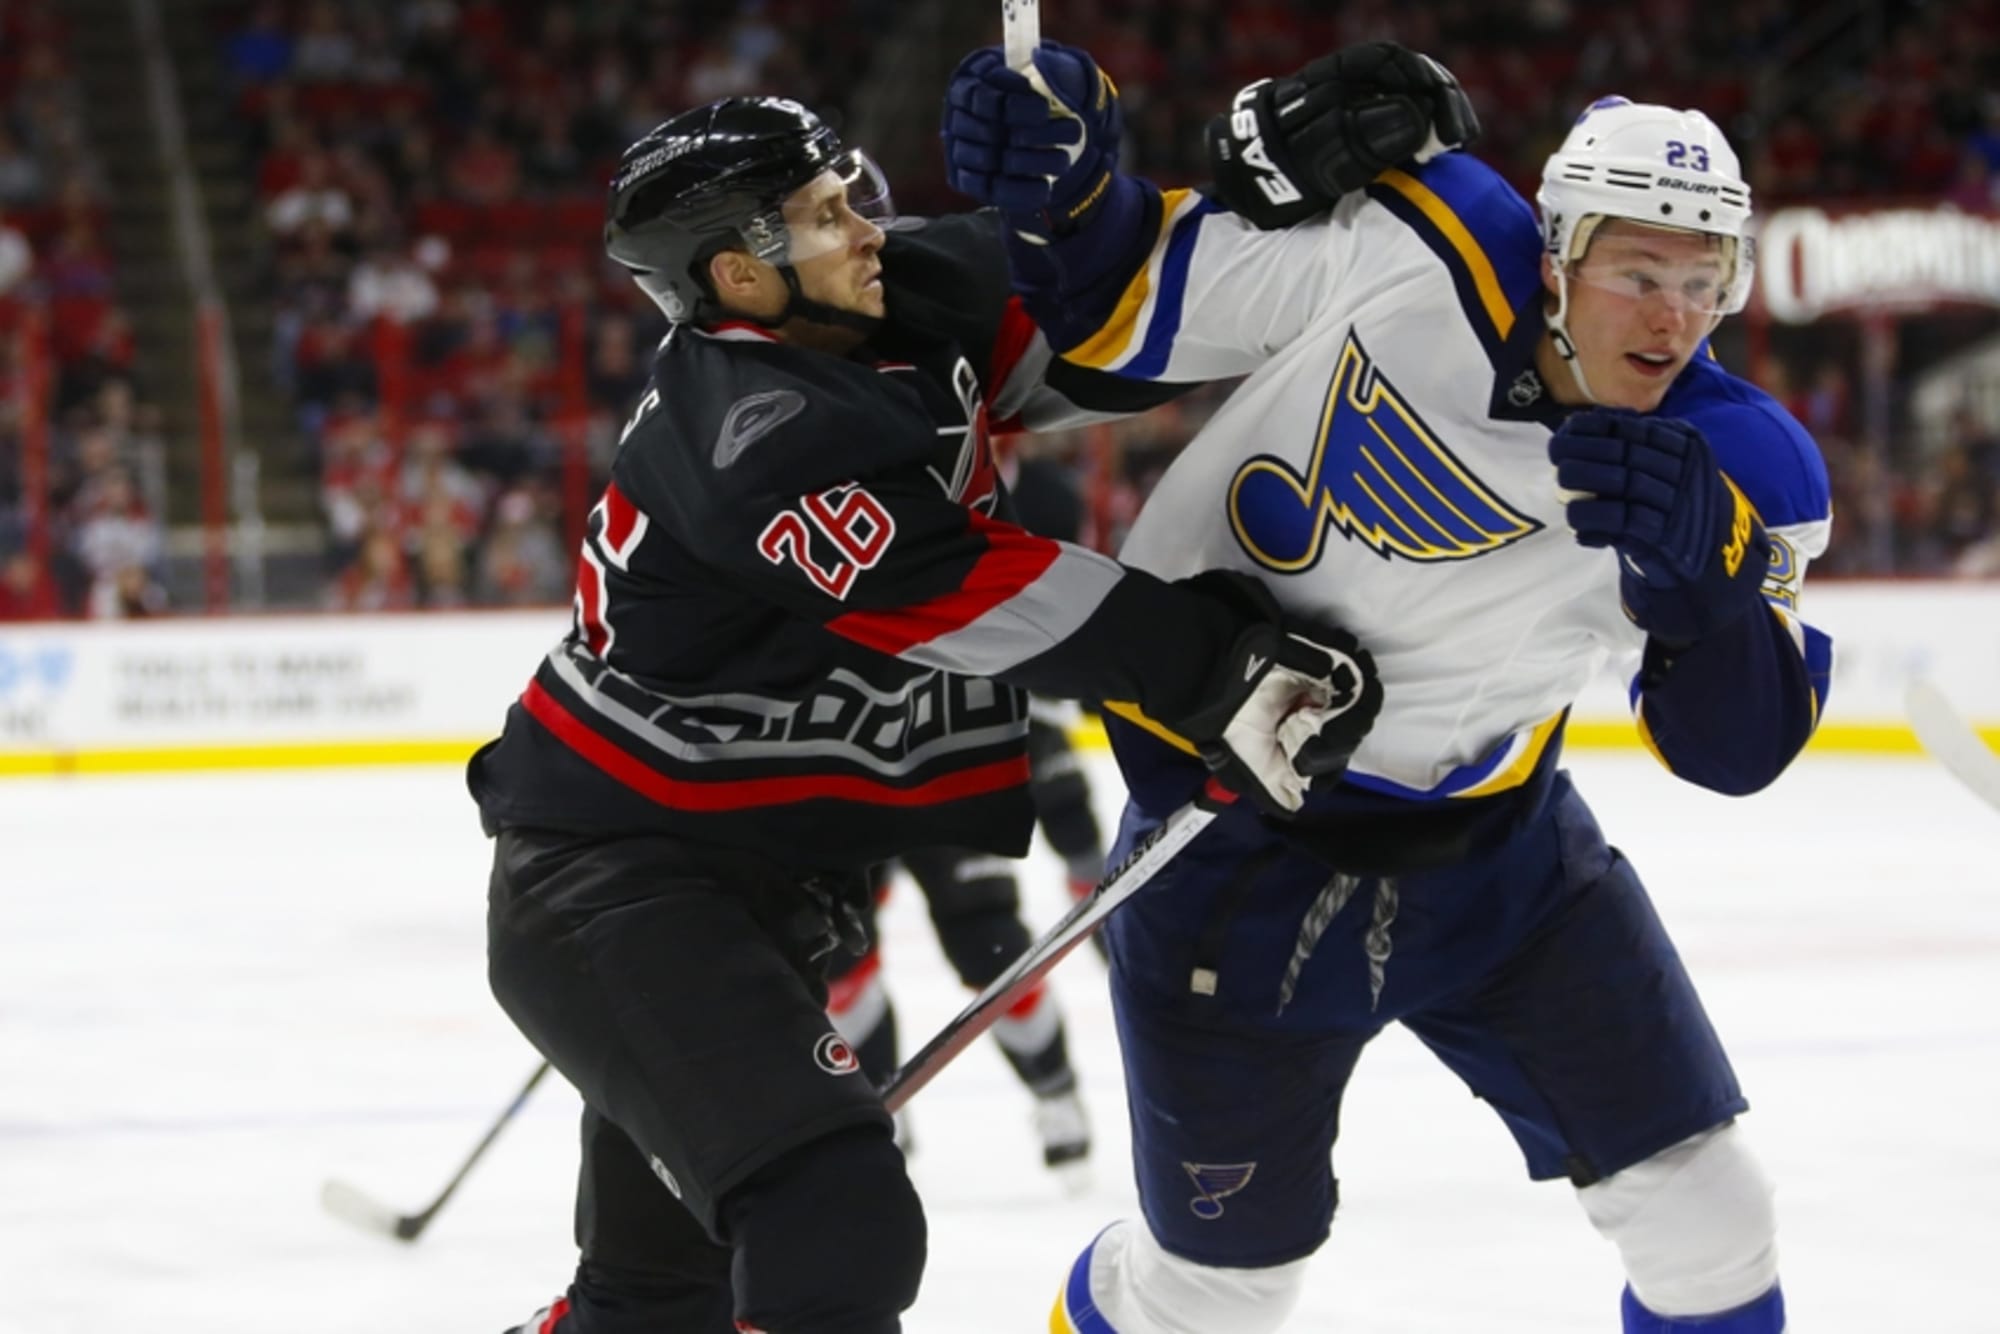 St. Louis Blues Opposition: The Carolina Hurricanes